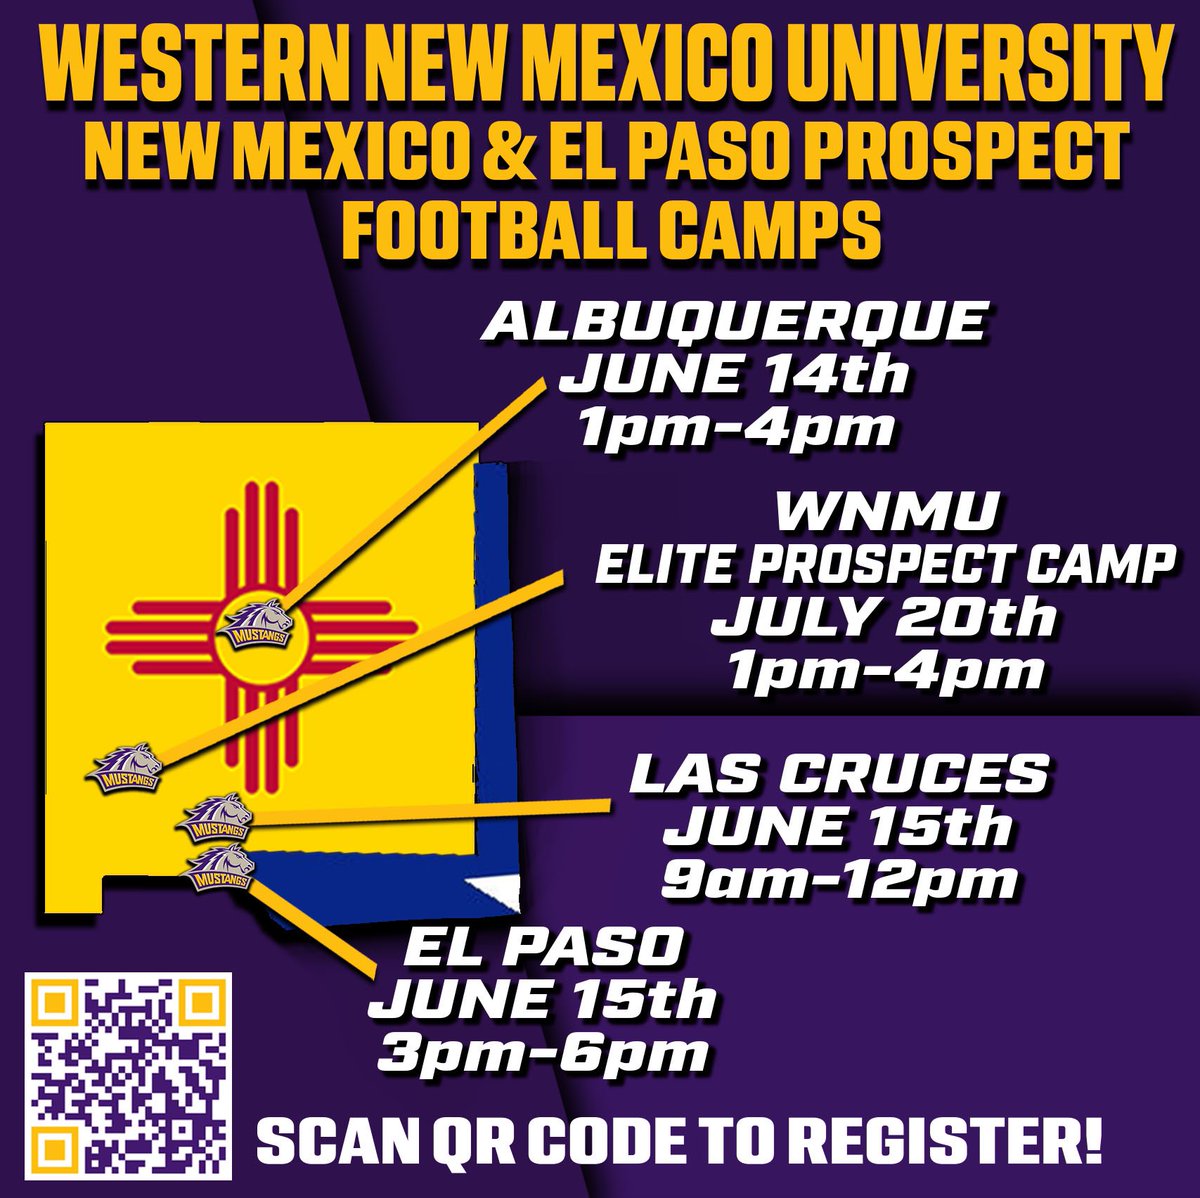 🚨WNMU Football coming to Mustang Country looking for new RareBreed‼️ 📍 Albuquerque 🗓️ June 14th 🕐 1 PM 📍 Las Cruces 🗓️ June 15th 🕘 9 AM 📍 El Paso 🗓️ June 15th 🕒 3 PM 📍 Silver City 🗓️ July 20th 🕐 1 PM Register by scanning the QR Code or go to hickmanfootballcamps.com